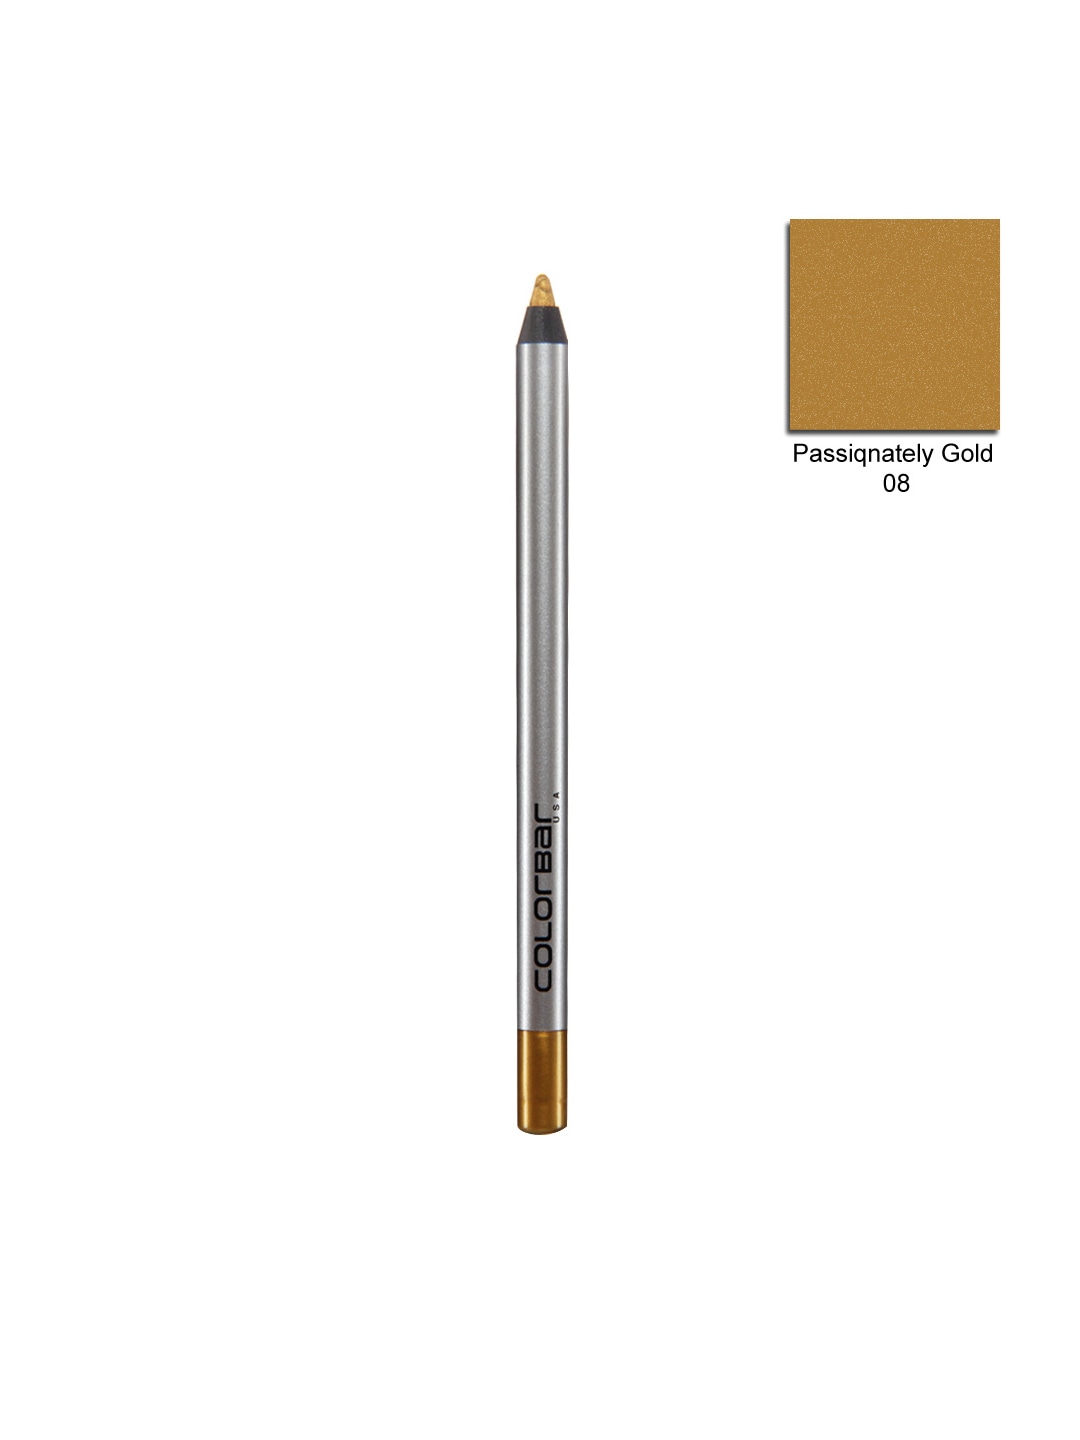 Colorbar I-Glide Passionately Gold Eye Pencil 08